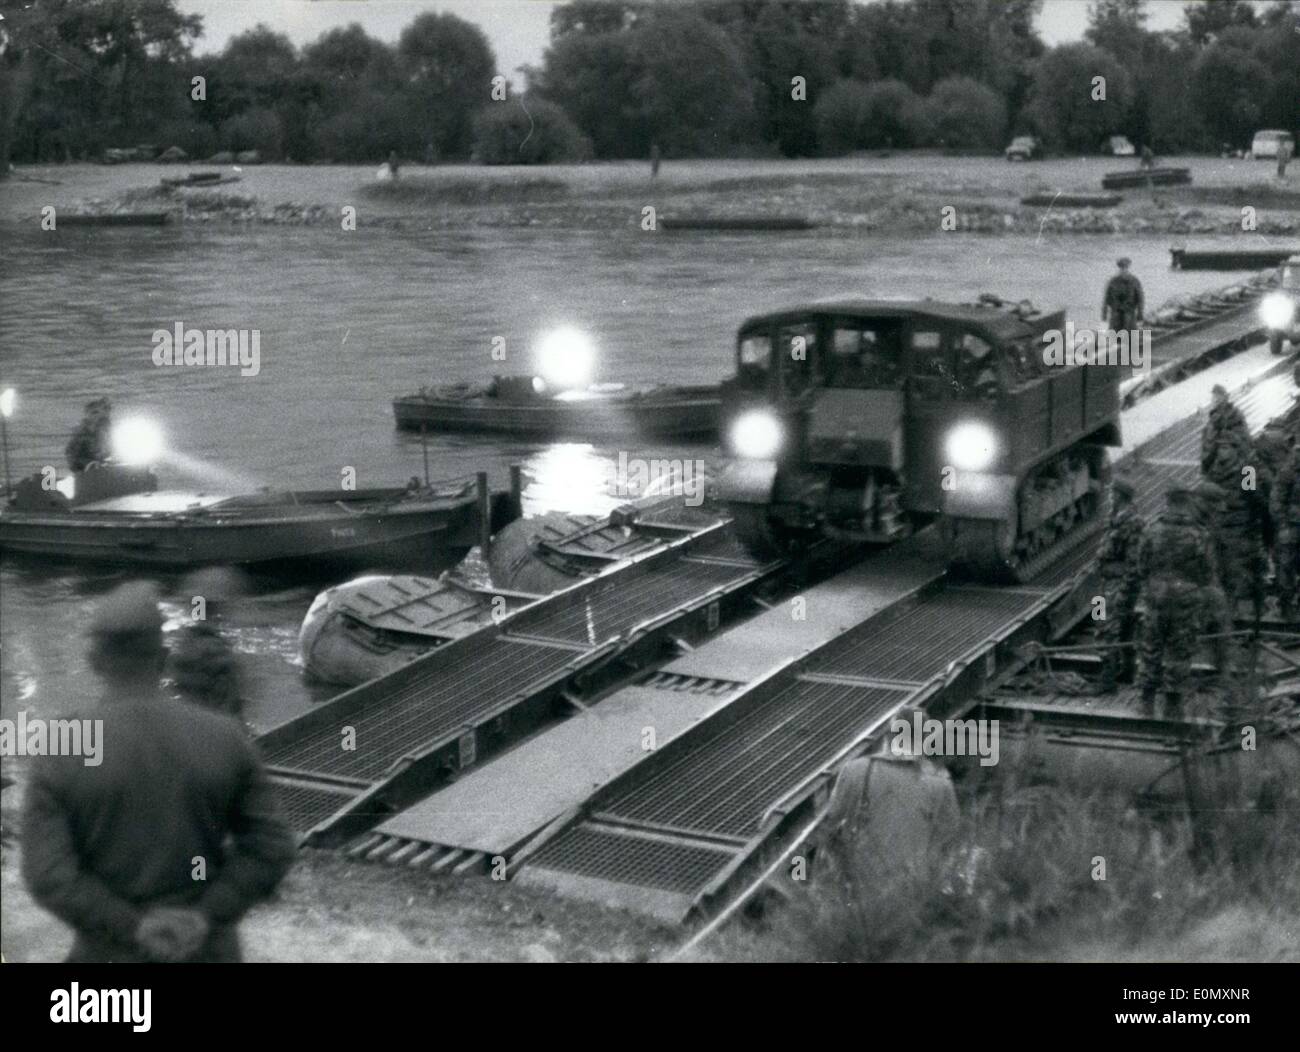 Oct. 30, 1956 - The Munich Pioneers Teaching Battalion laid a pontoon bridge across the Donau/Danube river near Ingolstadt. It was the first time, post WW2, that the pioneers had taken up an exercise like this. Our picture shows a moment in the laying of the bridge, which was 100m long and took 50 minutes to build. Stock Photo